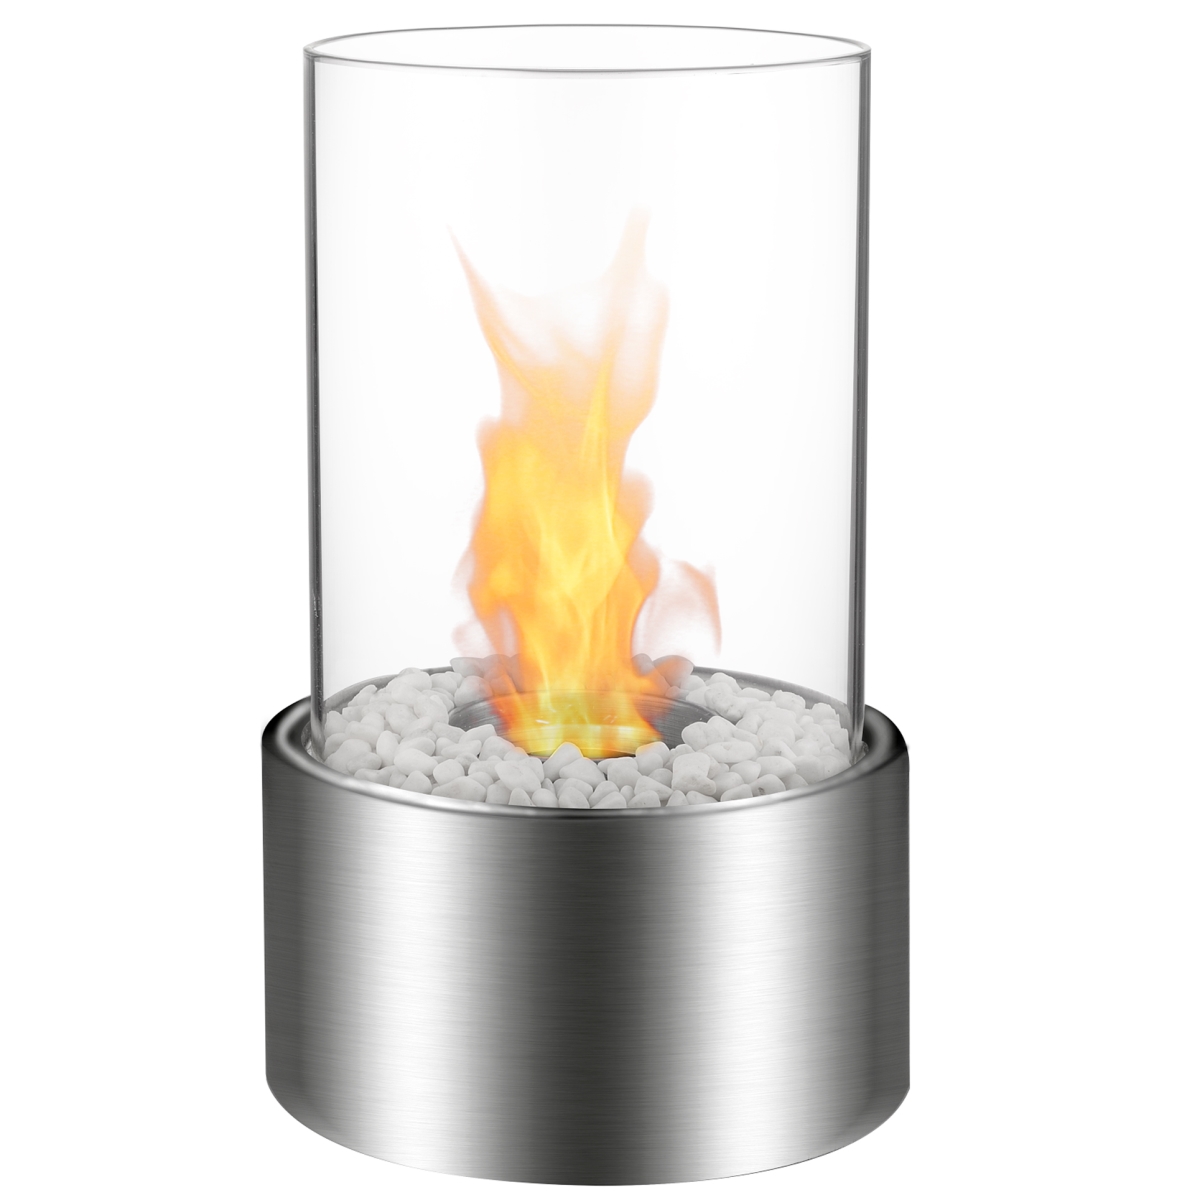 Et7001ss-mf Eden Ventless Tabletop Portable Bio Ethanol Fireplace In Stainless Steel